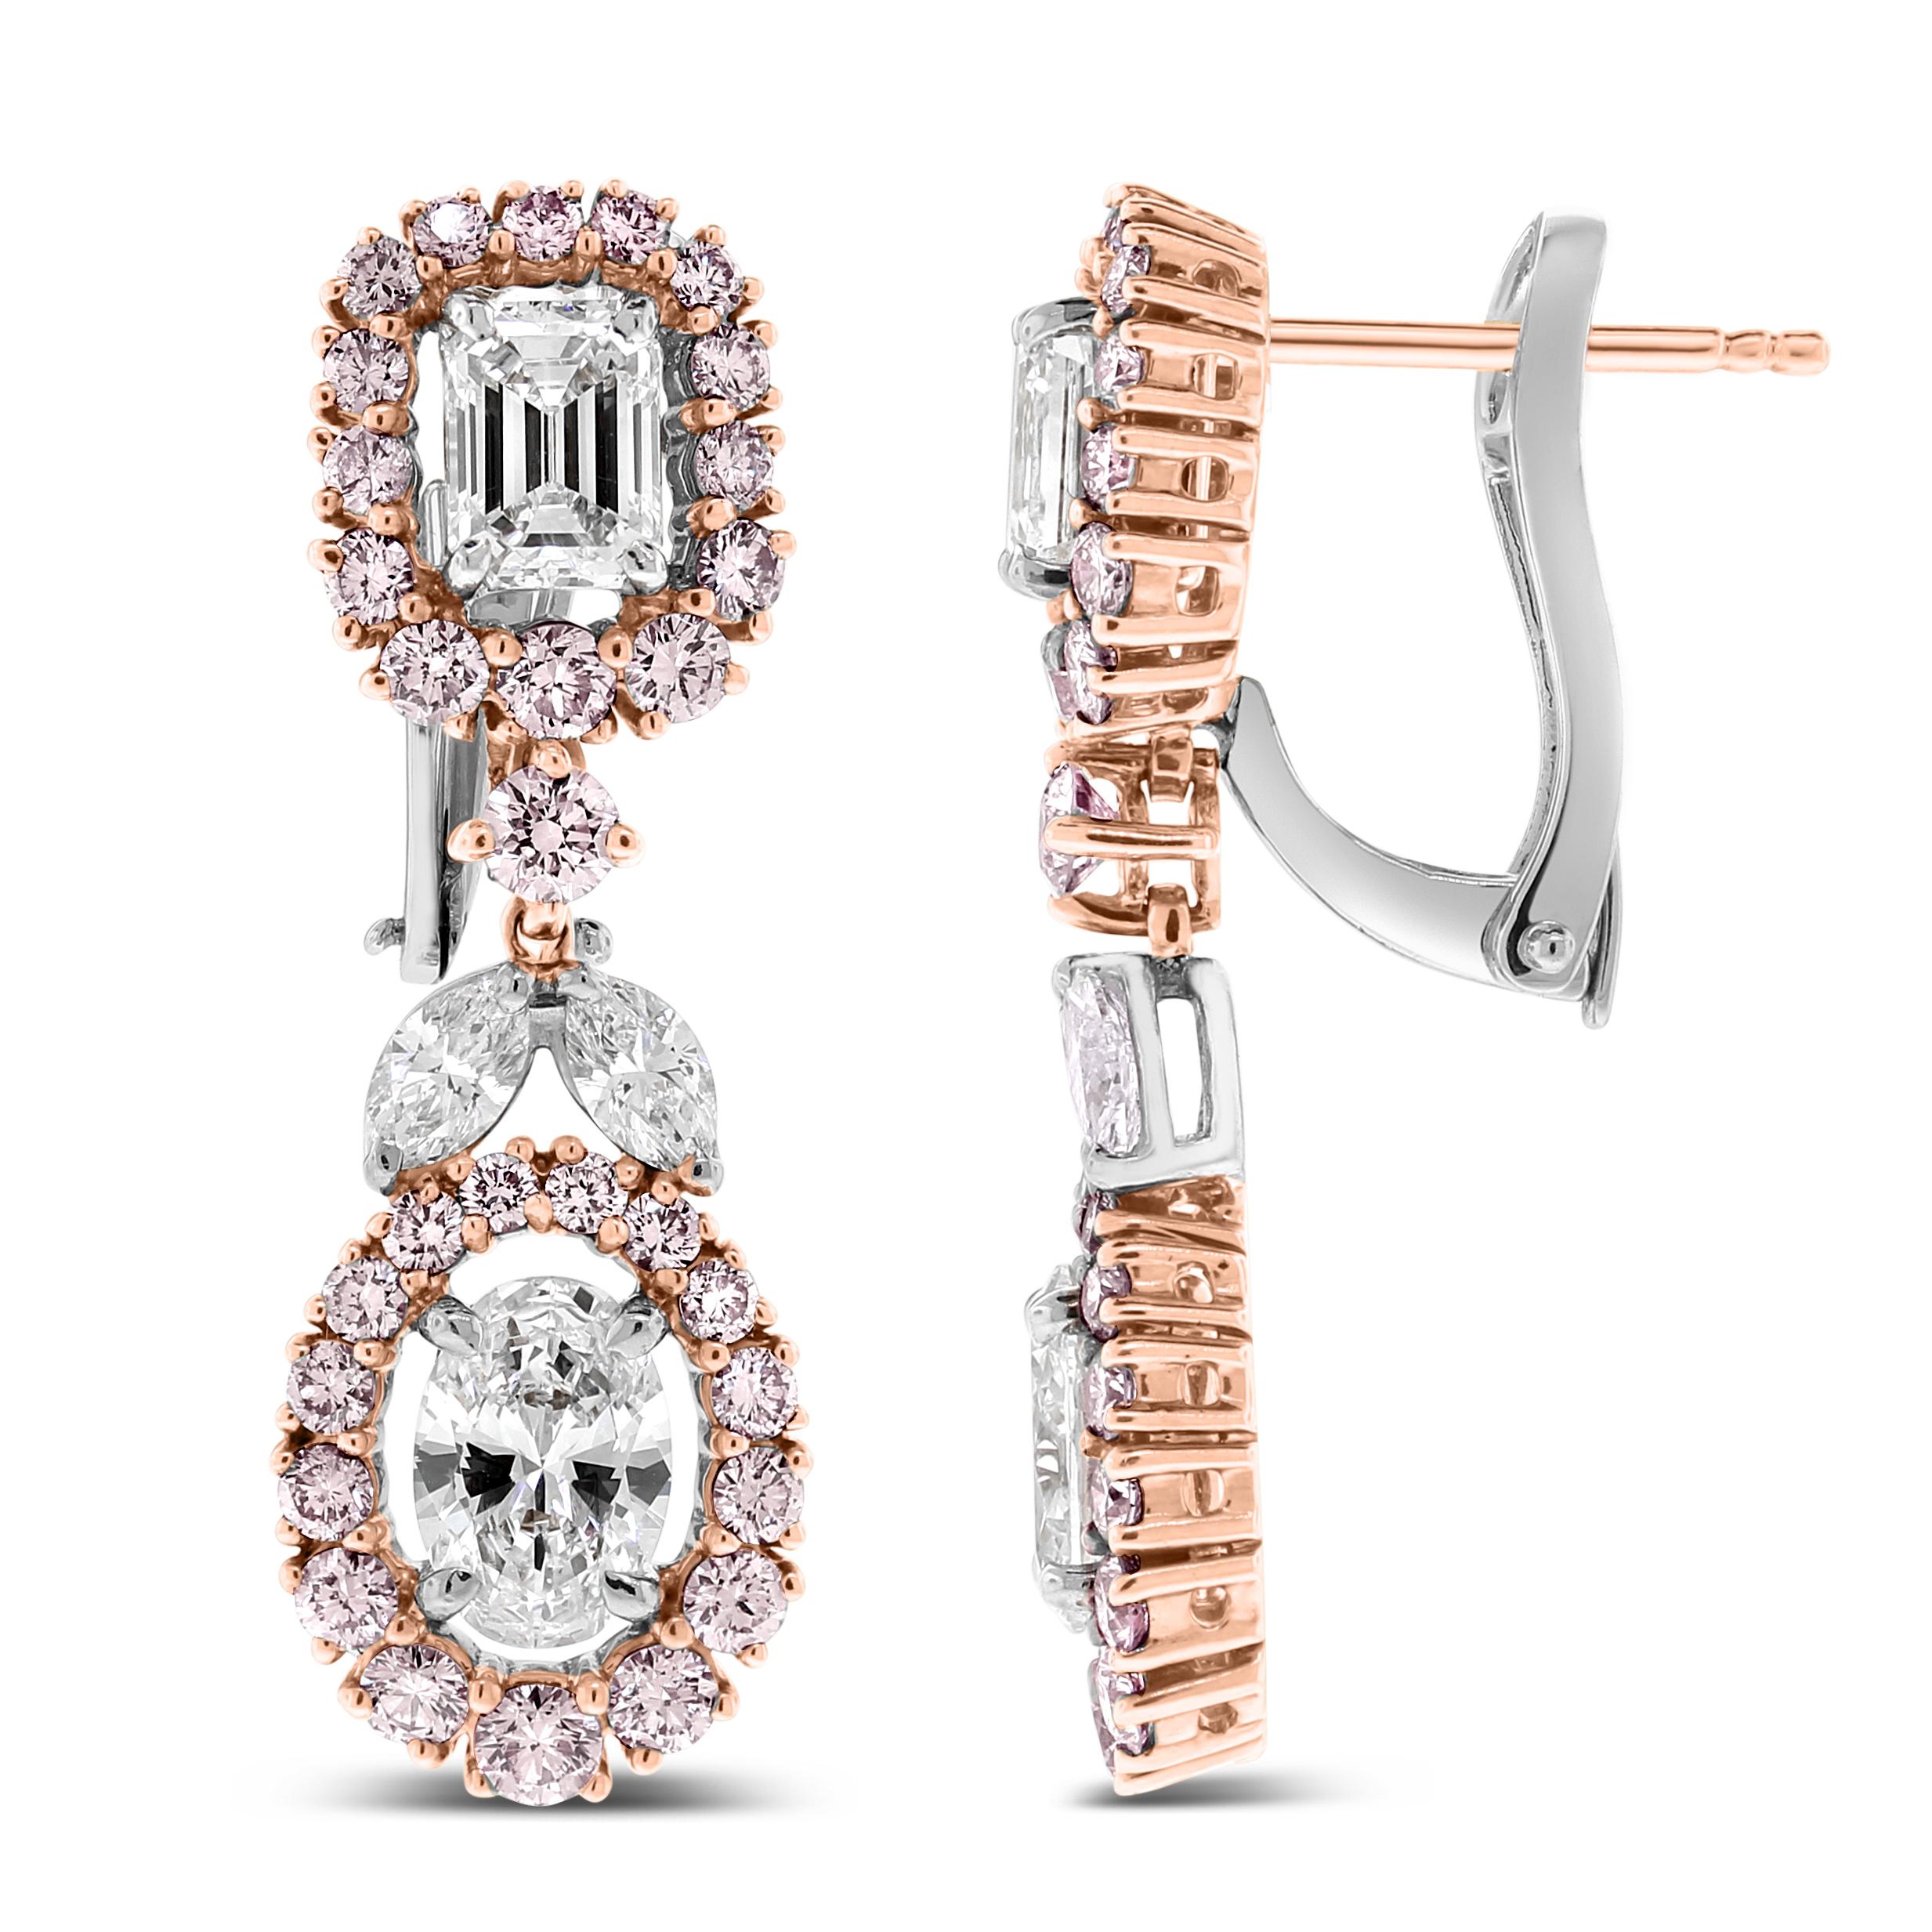 Contemporary Beauvince Ariana Diamond Earrings '6.91 ct Diamonds' in Rose Gold & Platinum For Sale